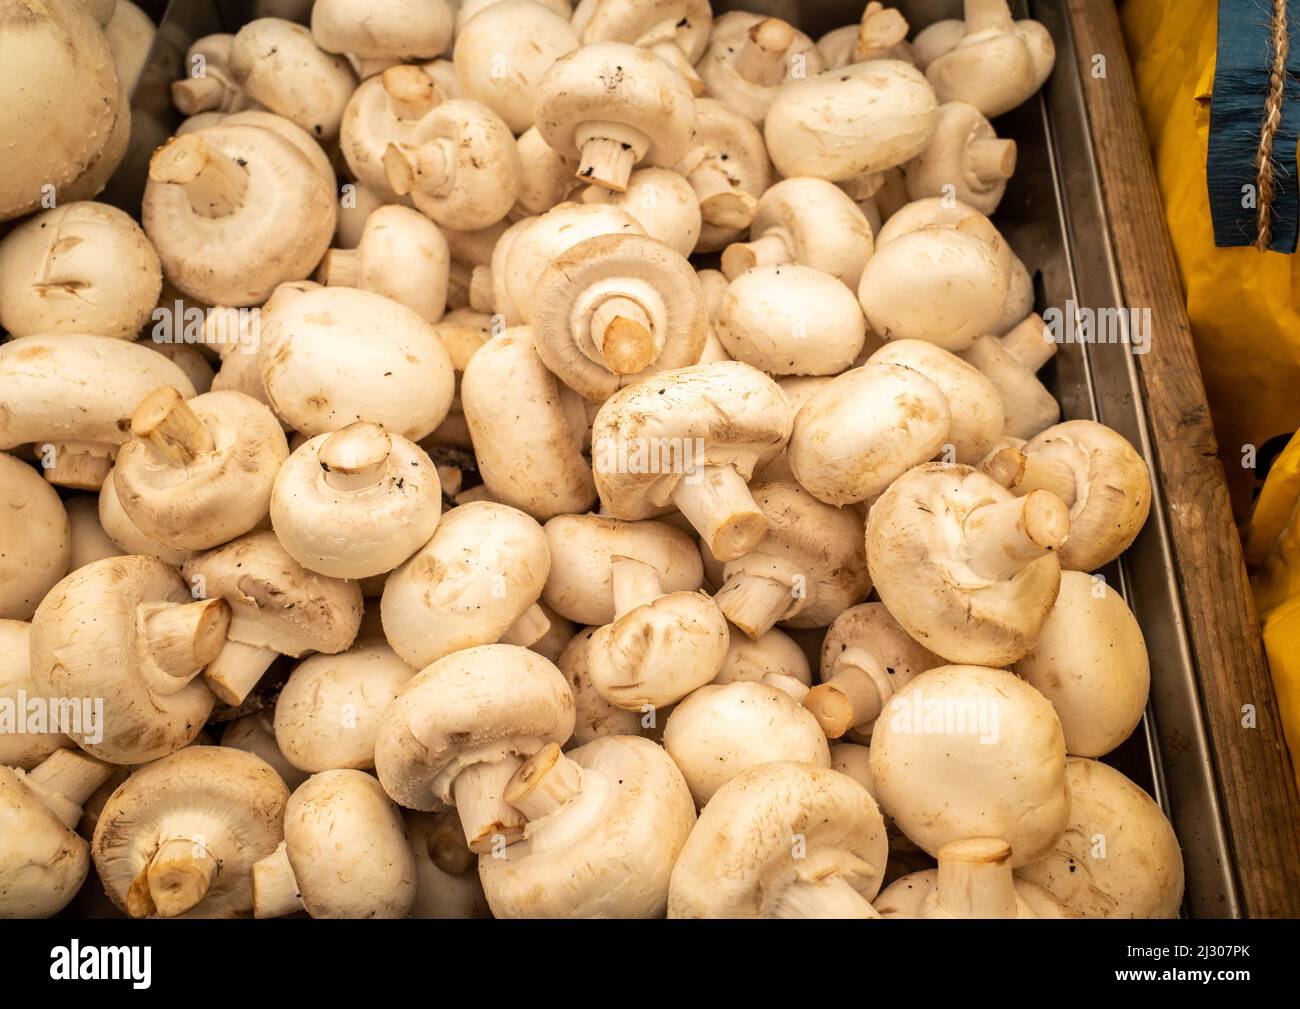 A display of white mushrooms in a box at a grocery store. Stock Photo